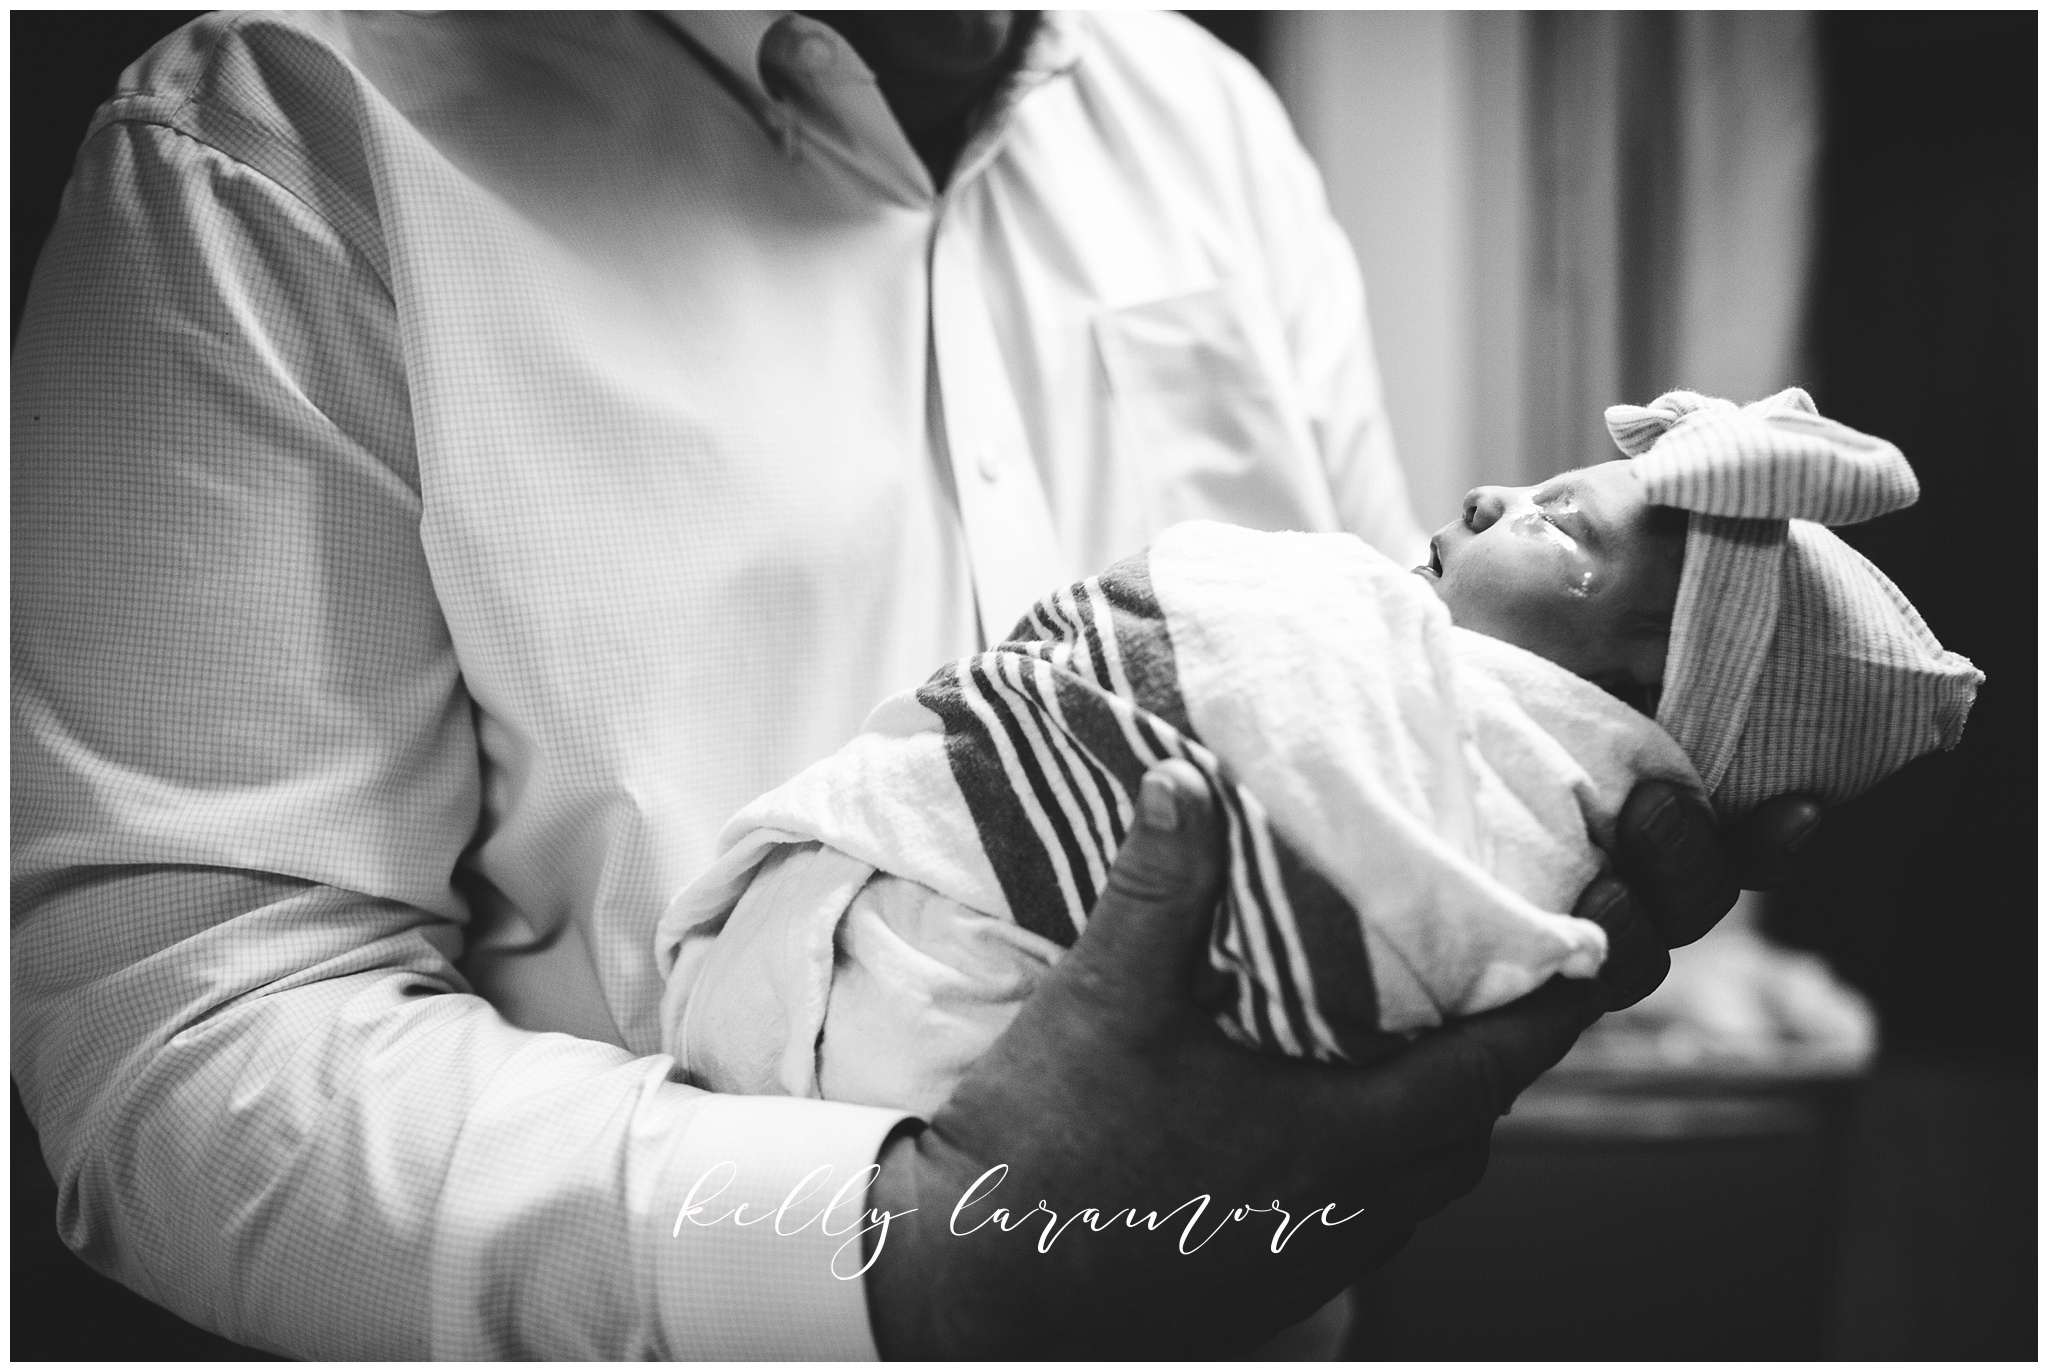 st louis birth story photographer, st louis family photographer, missouri baptist birth center birth, delivery room, baby bow